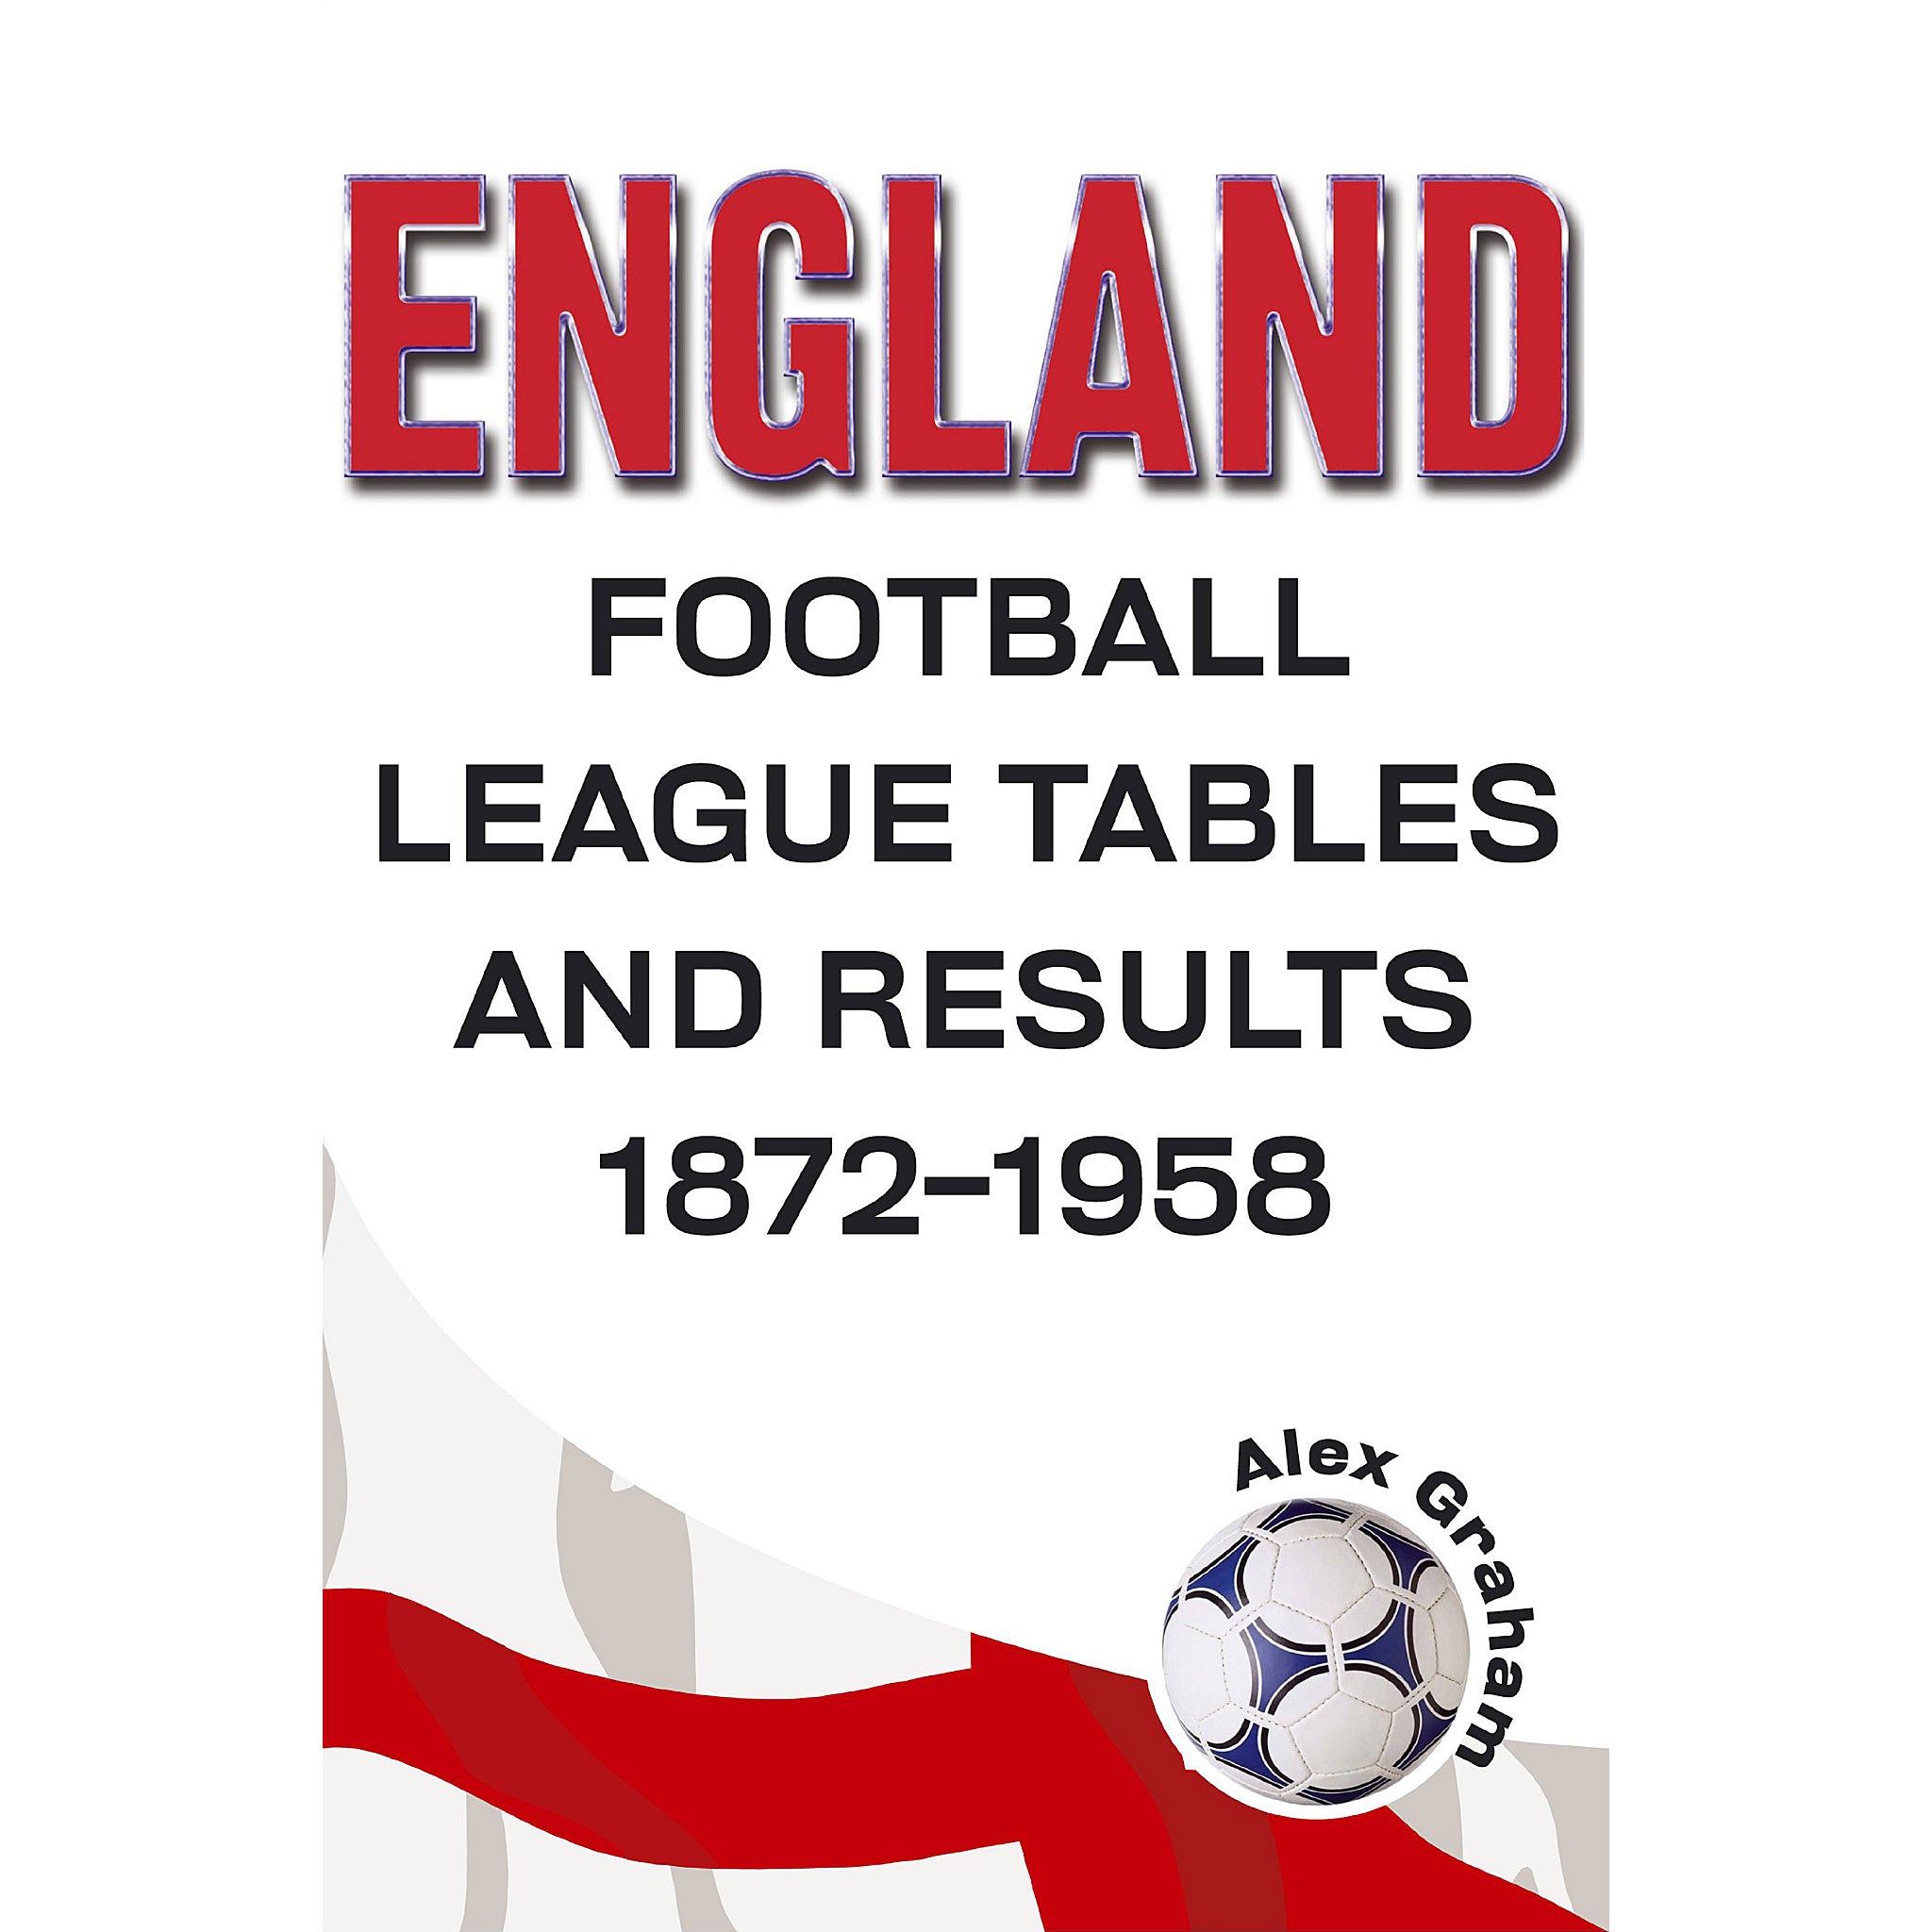 England – Football League Tables and Results 1872-1958